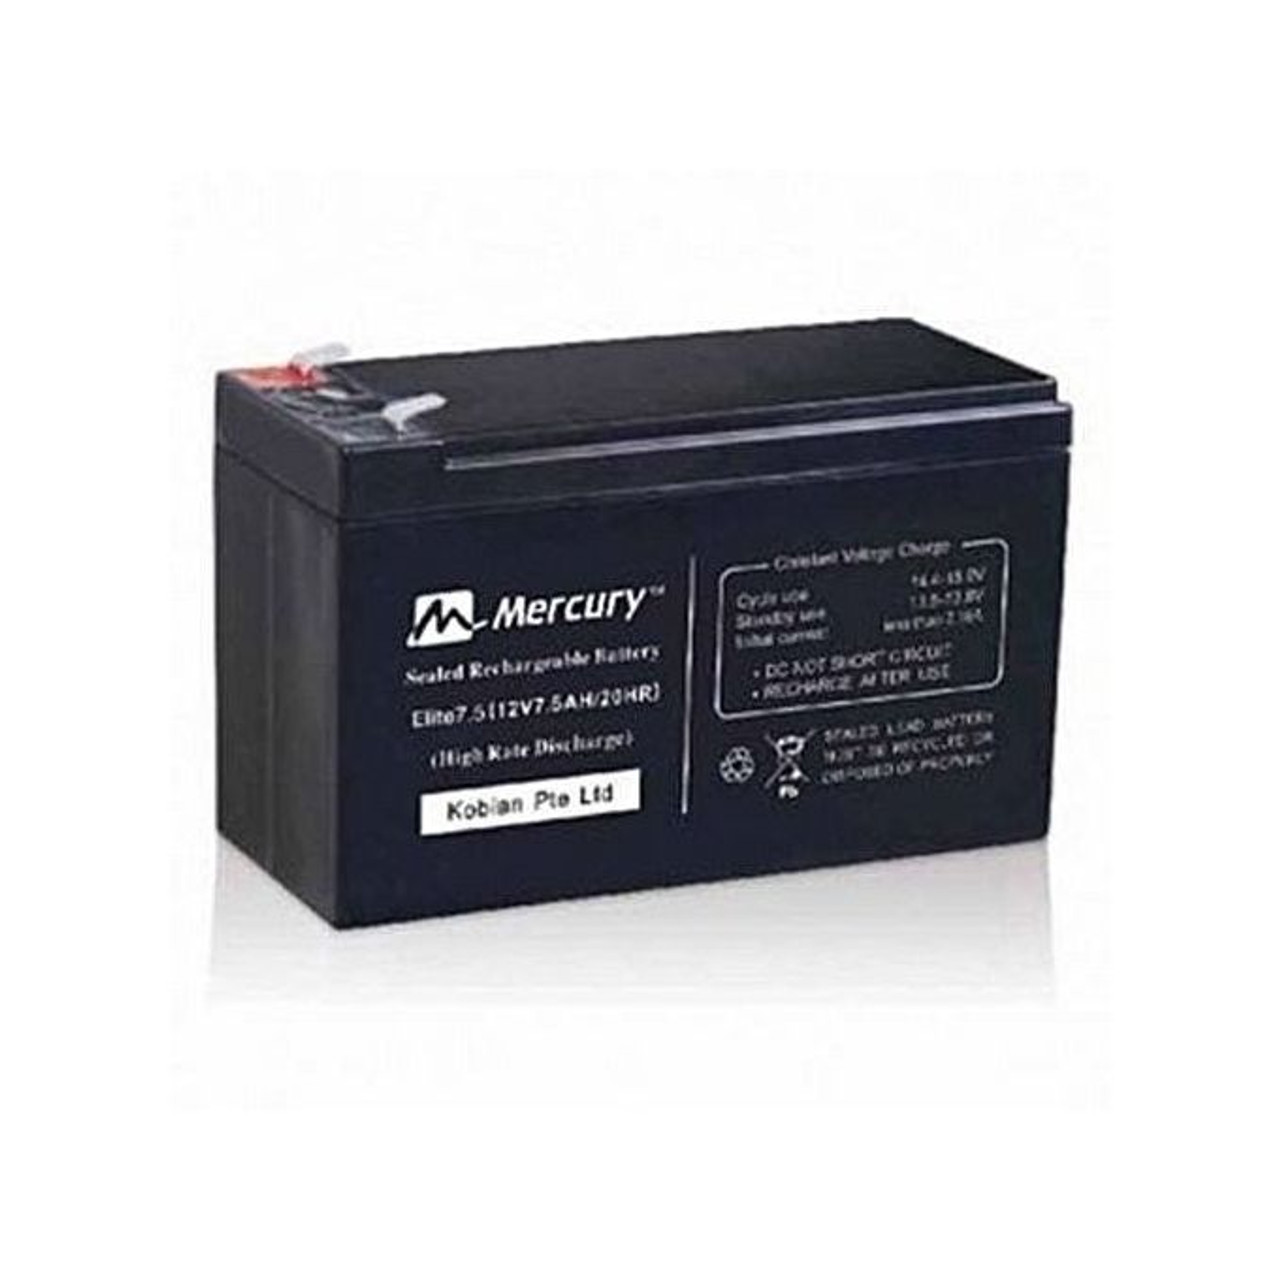 Buy Mercury Ups Replacement Battery in Nigeria from GZ Industrial Supplies